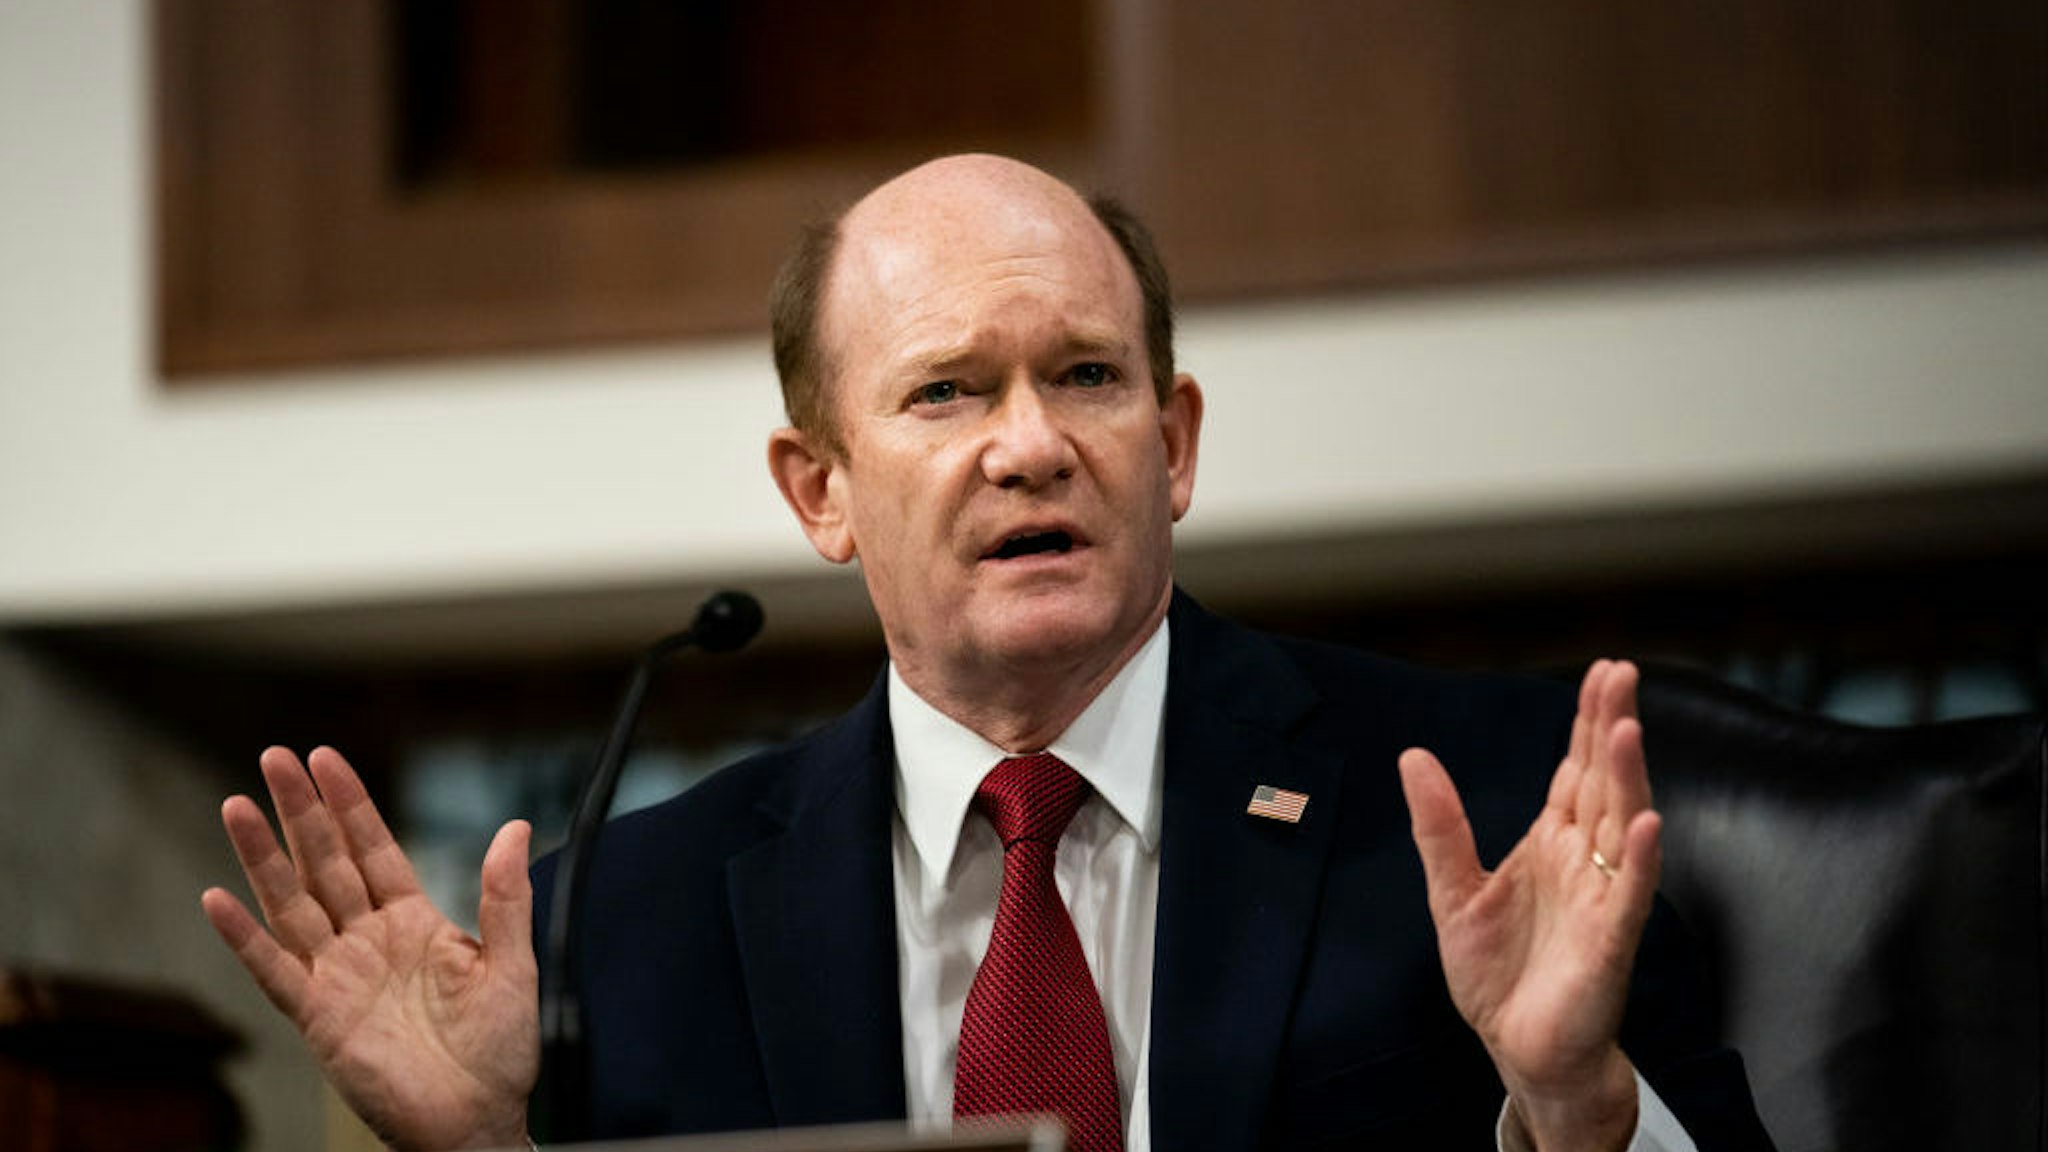 WASHINGTON, DC - AUGUST 5: Sen. Chris Coons (D-DE) speaks during a Senate Judiciary Committee hearing on "oversight of the crossfire hurricane investigation" on Capitol Hill on August 5, 2020 in Washington, DC. (Photo by Erin Schaff - Pool/Getty Images)